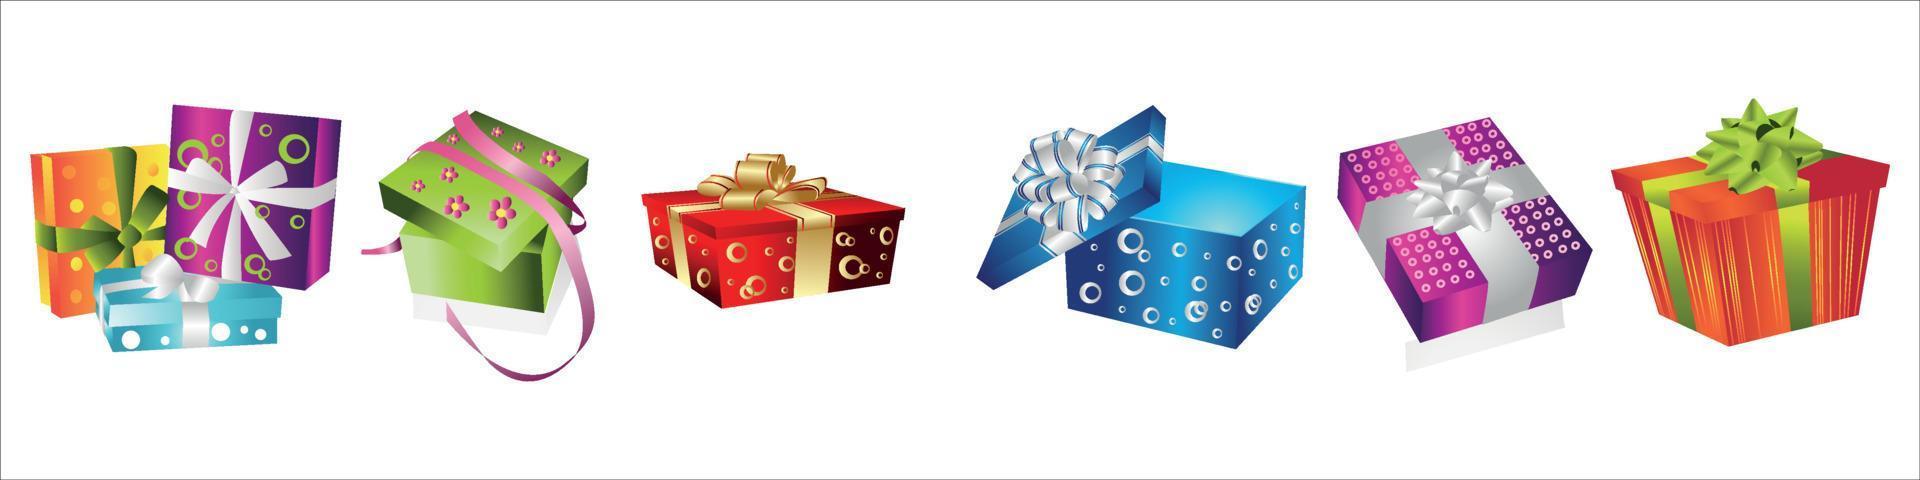 Colored Gift Boxes with Ribbon vector